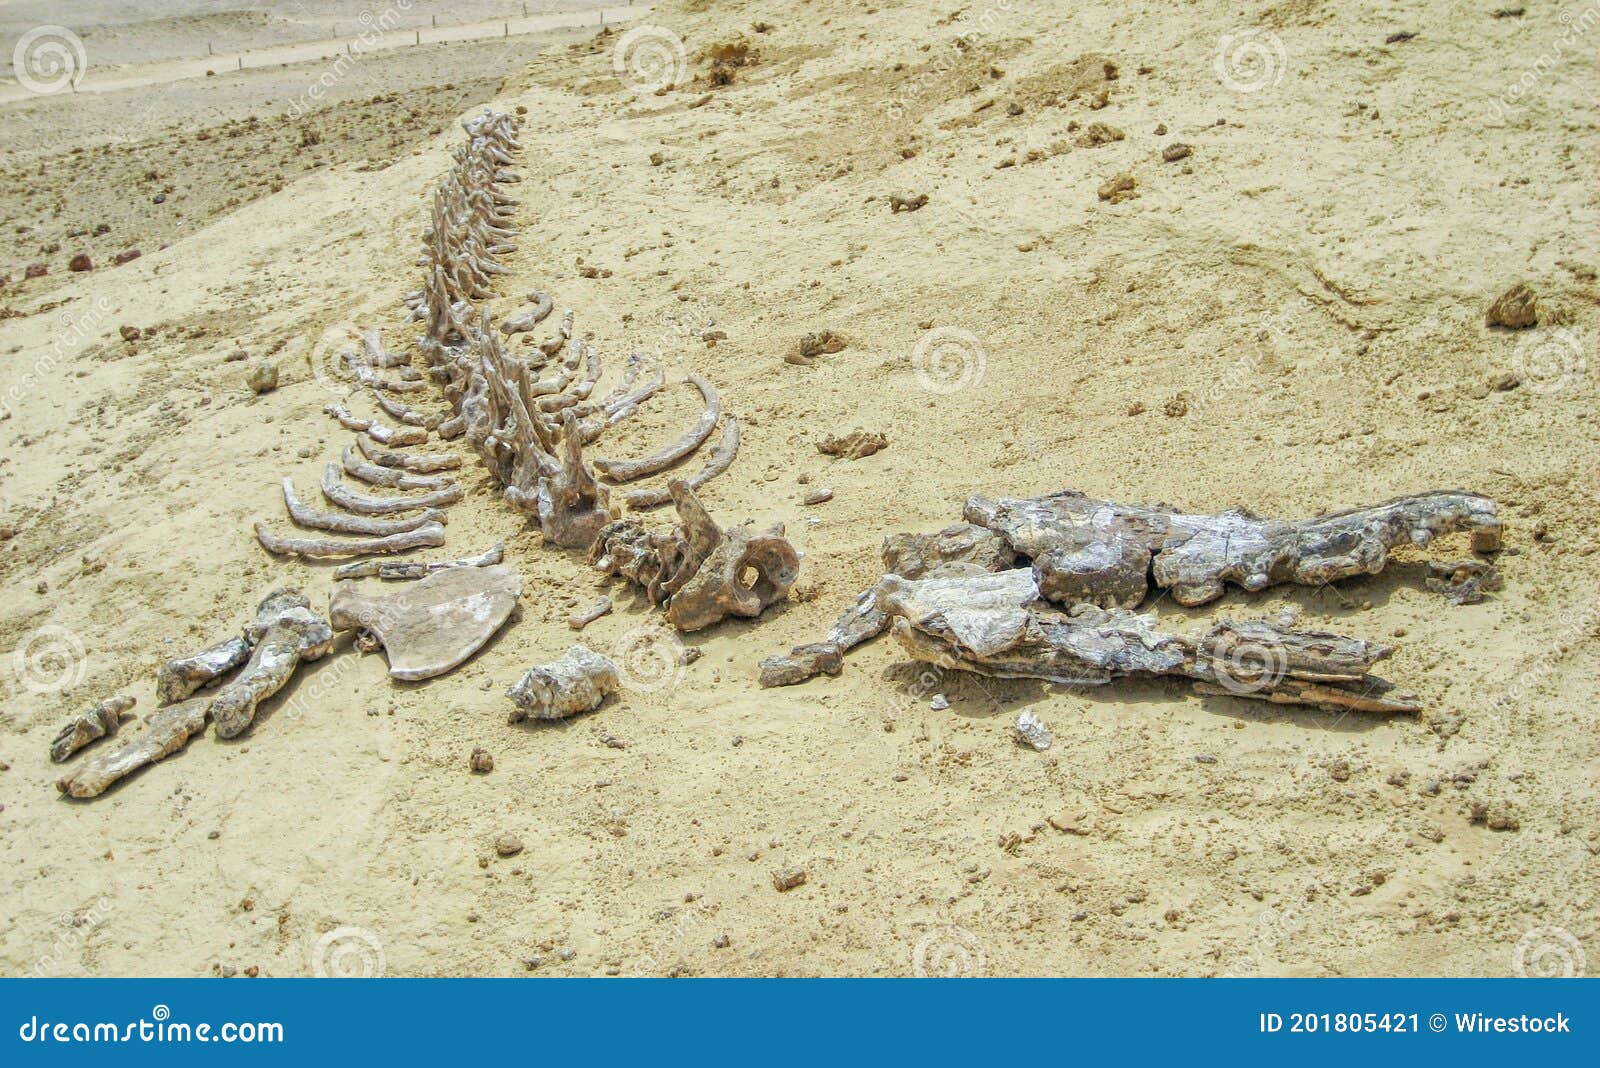 whale skeleton in wadi el hitan (valley of the whales), paleontological site in the faiyum (egypt)